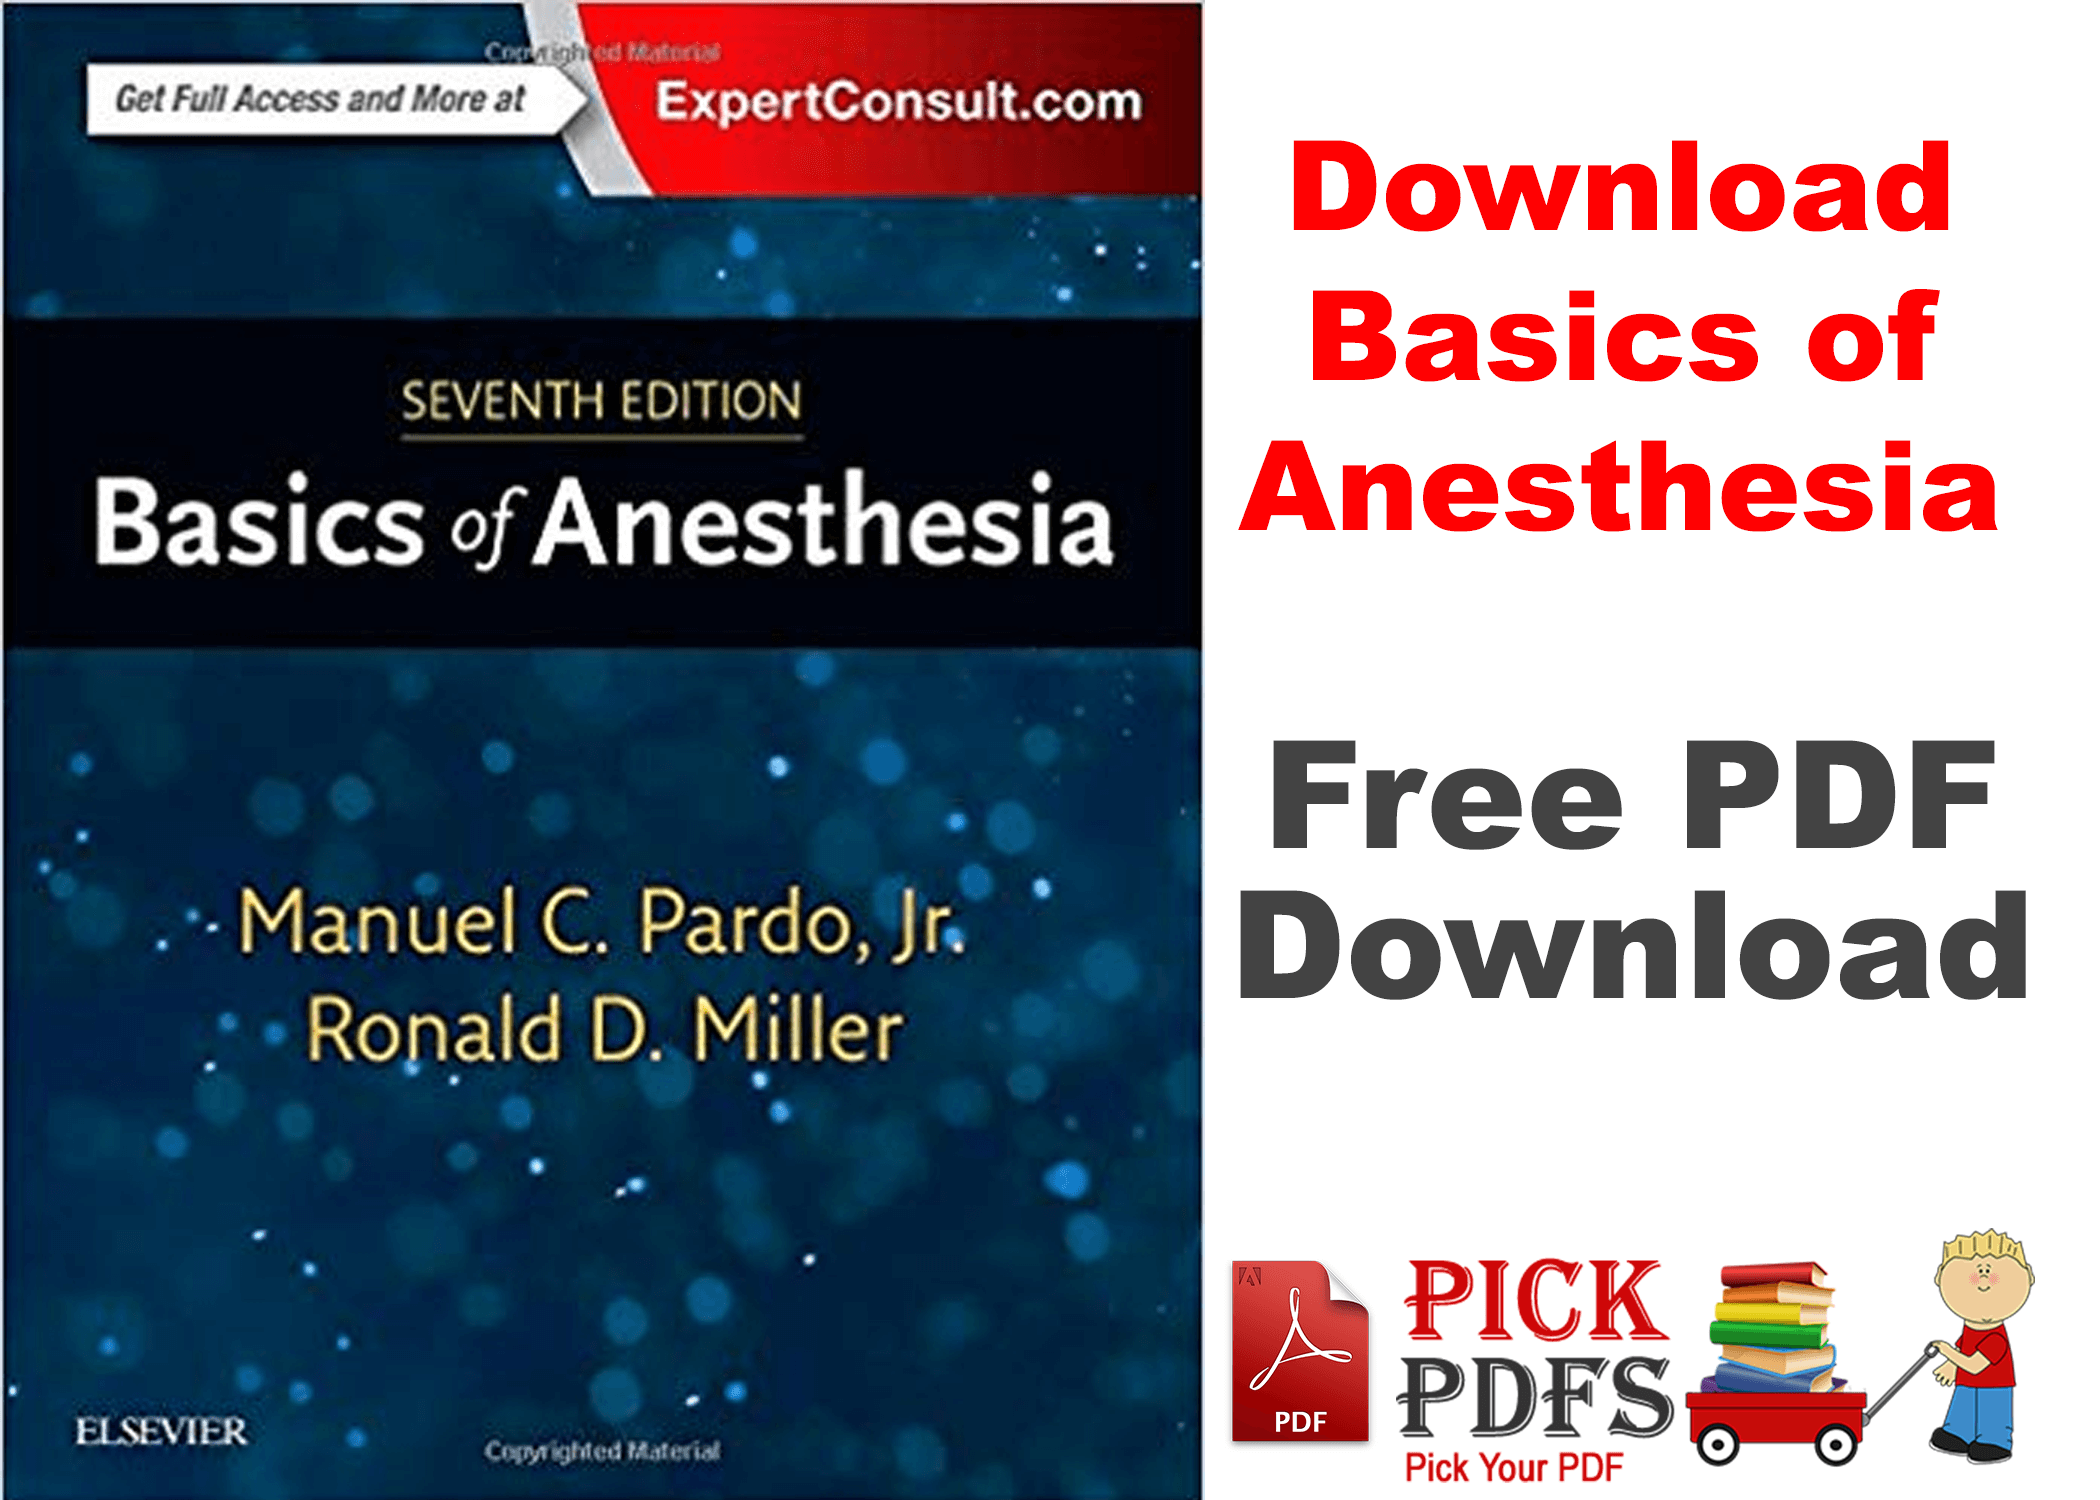 https://pickpdfs.com/basics-of-anesthesia-by-millar-7th-edition-free-pdf-download-book/